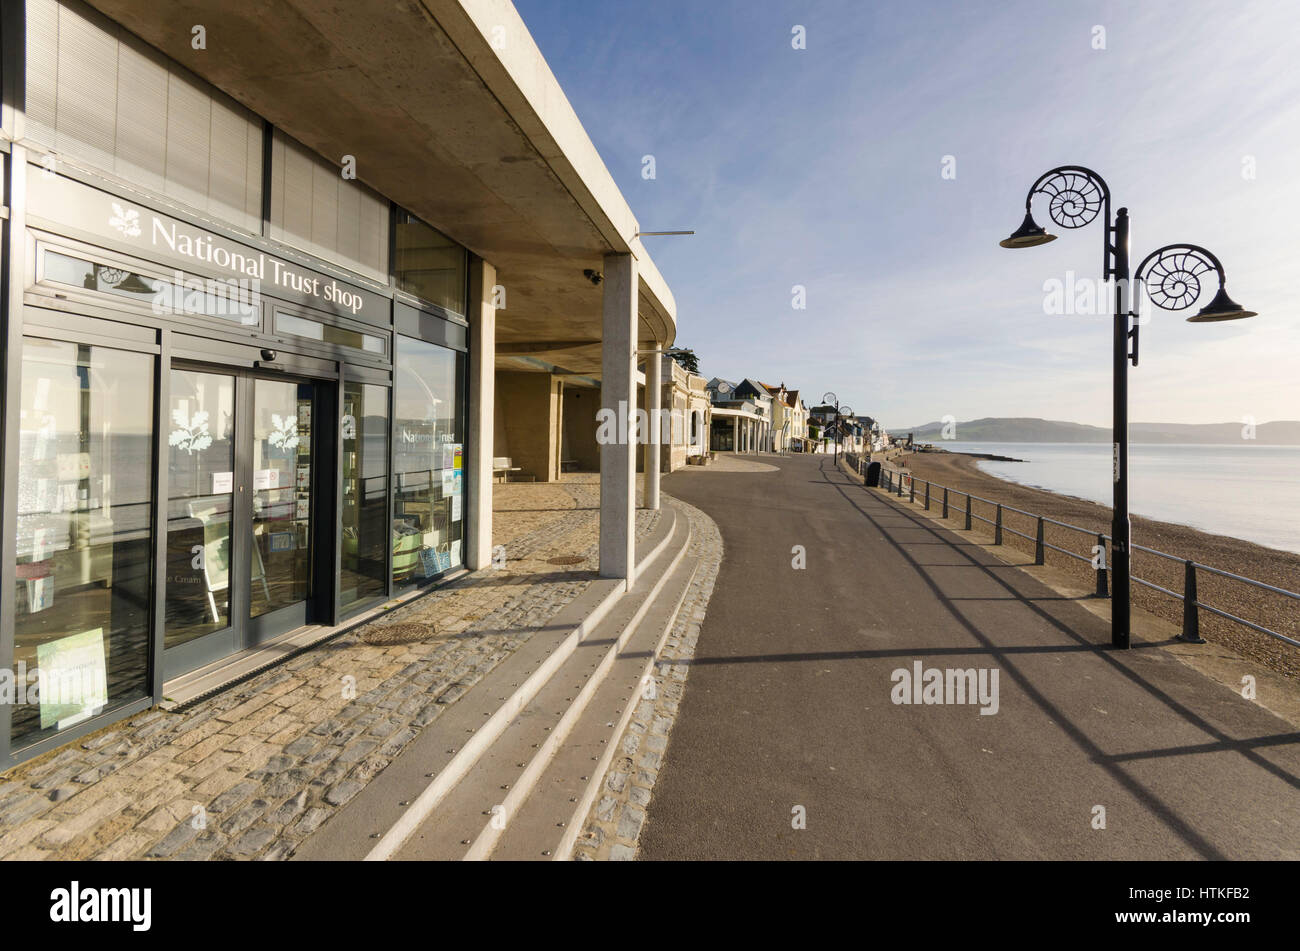 Lyme Regis, Dorset, UK.  13th March 2017.  UK Weather. Beautiful warm spring sunshine and blues skies during the morning at the seaside resort of Lyme Regis on the Dorset Jurassic Coast.  The view is Marine Parade on the seafront.  Photo by Graham Hunt/Alamy Live News Stock Photo